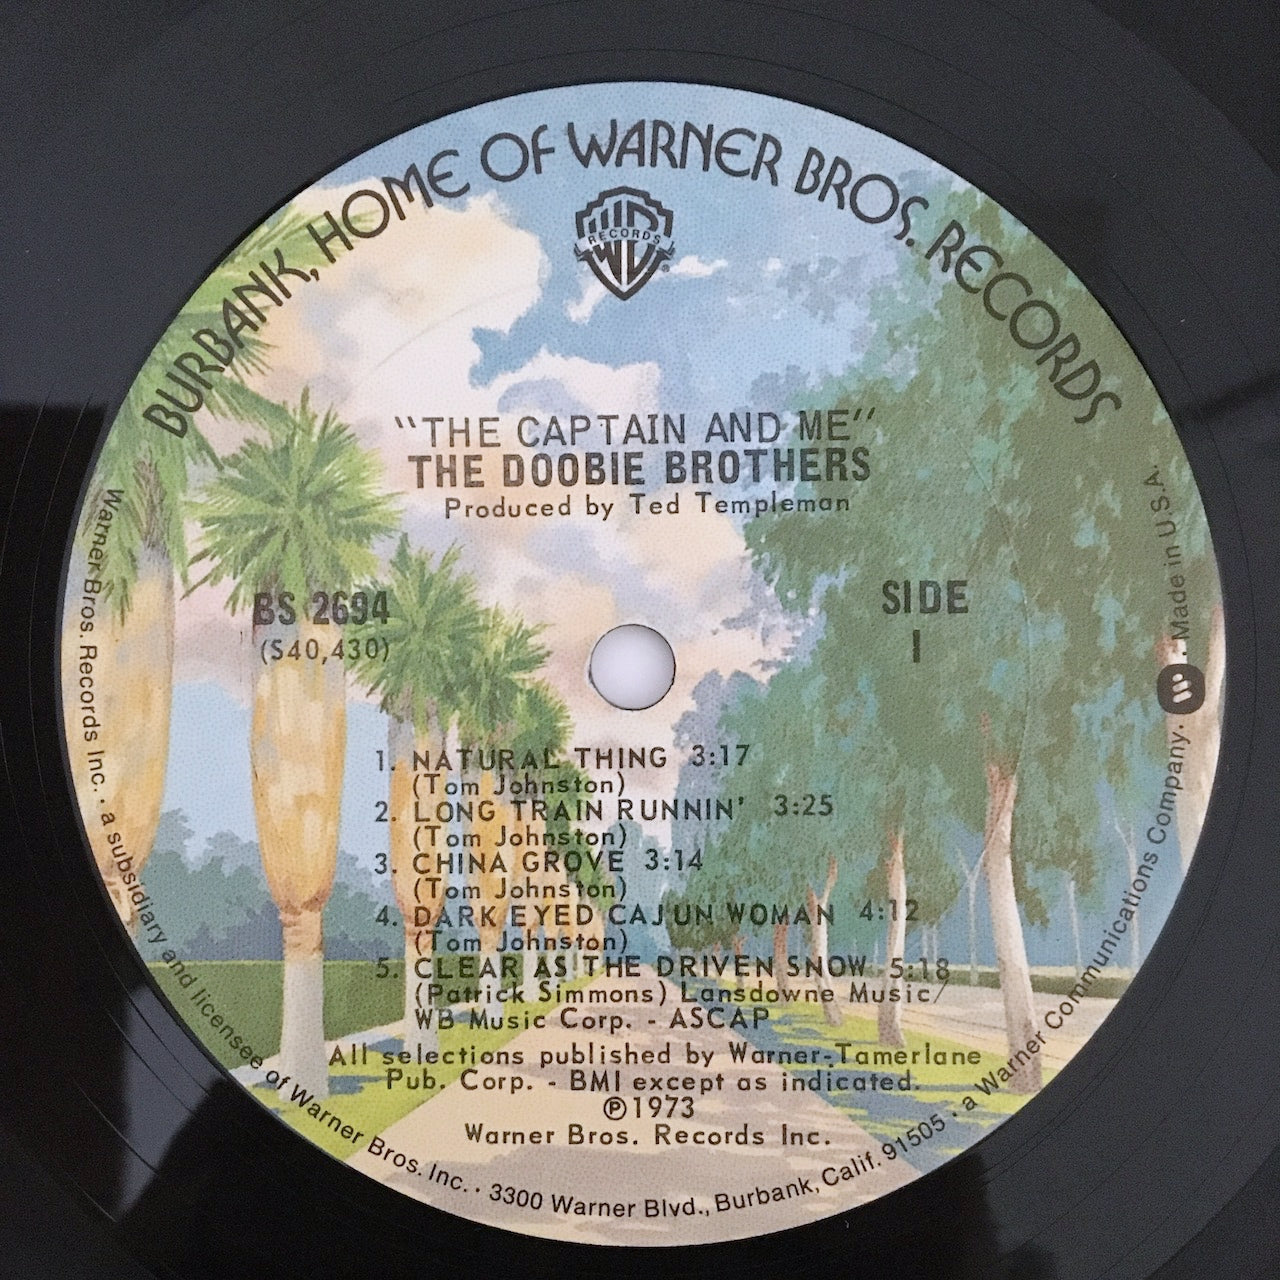 LP/ THE DOOBIE BROTHERS / THE CAPTAIN AND ME / US盤  WARNER BROS.  BS2694